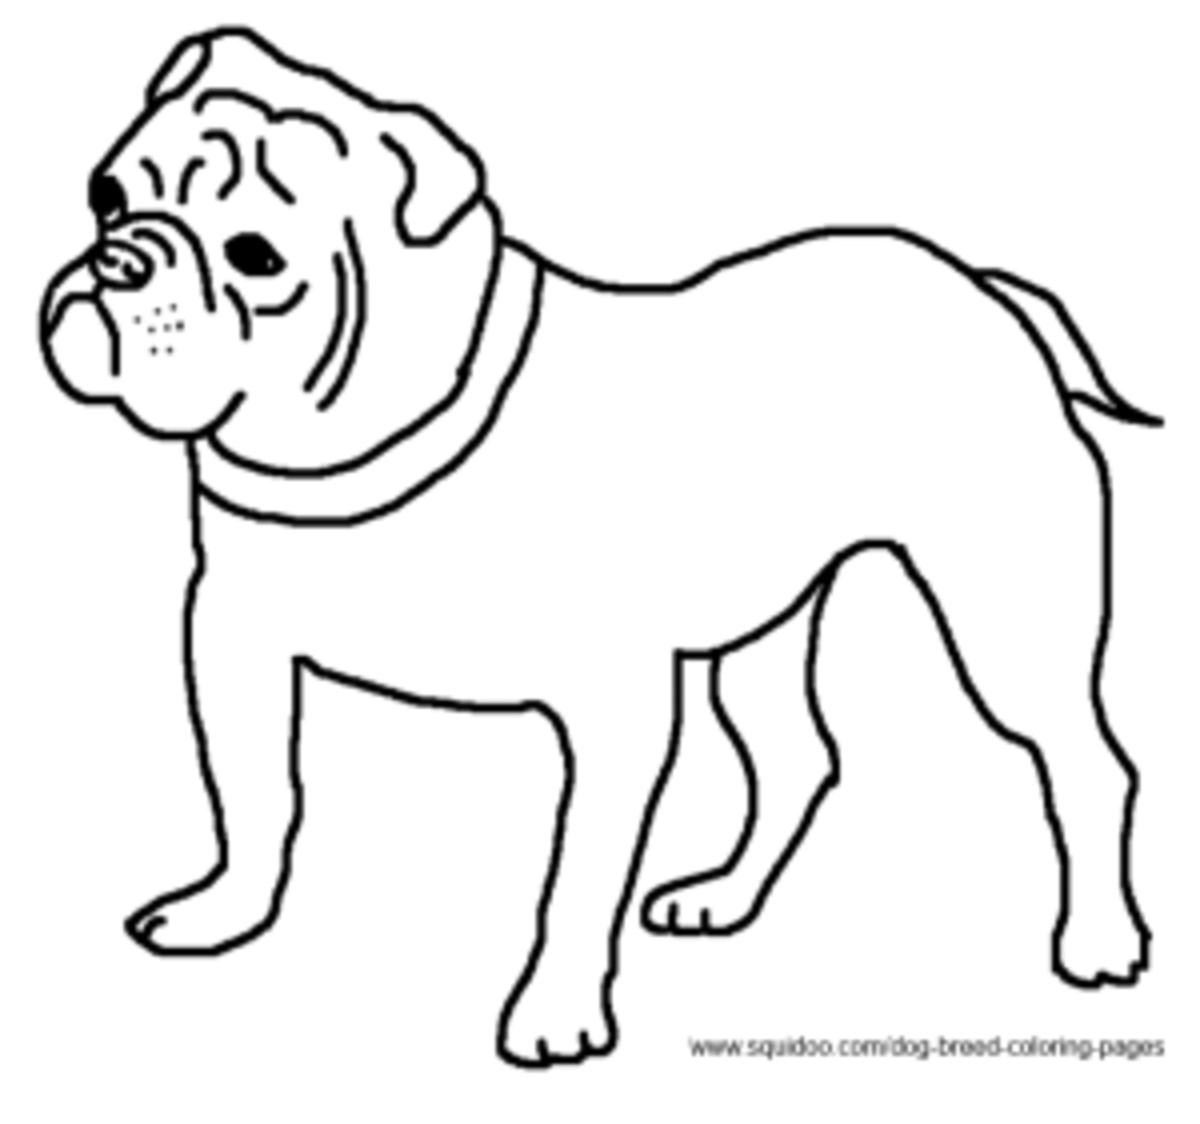 Dog Breed Coloring Pages - HubPages